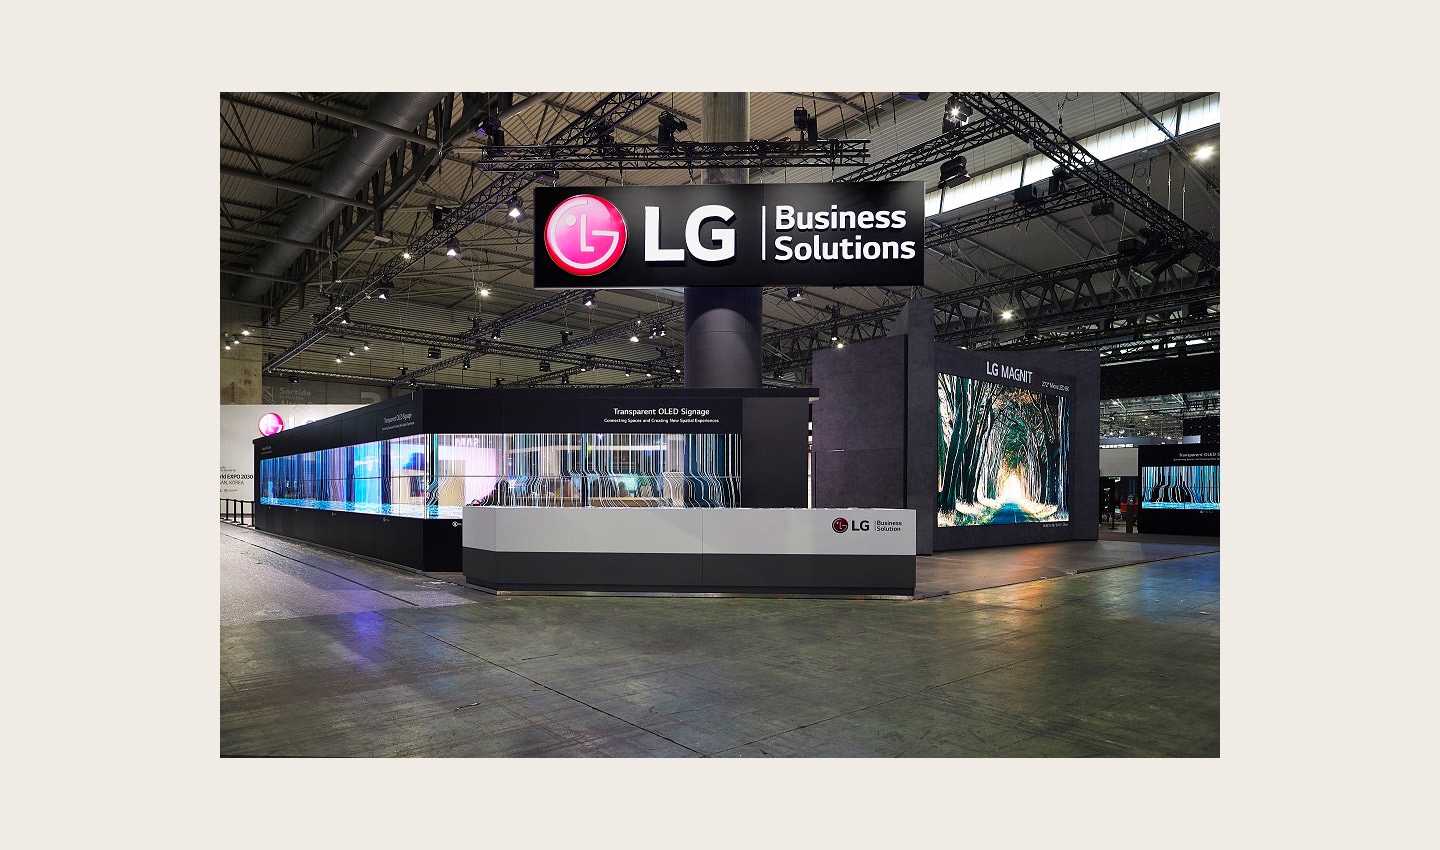 Transparent OLED Signage on display at LG's booth at ISE 2023, side angle